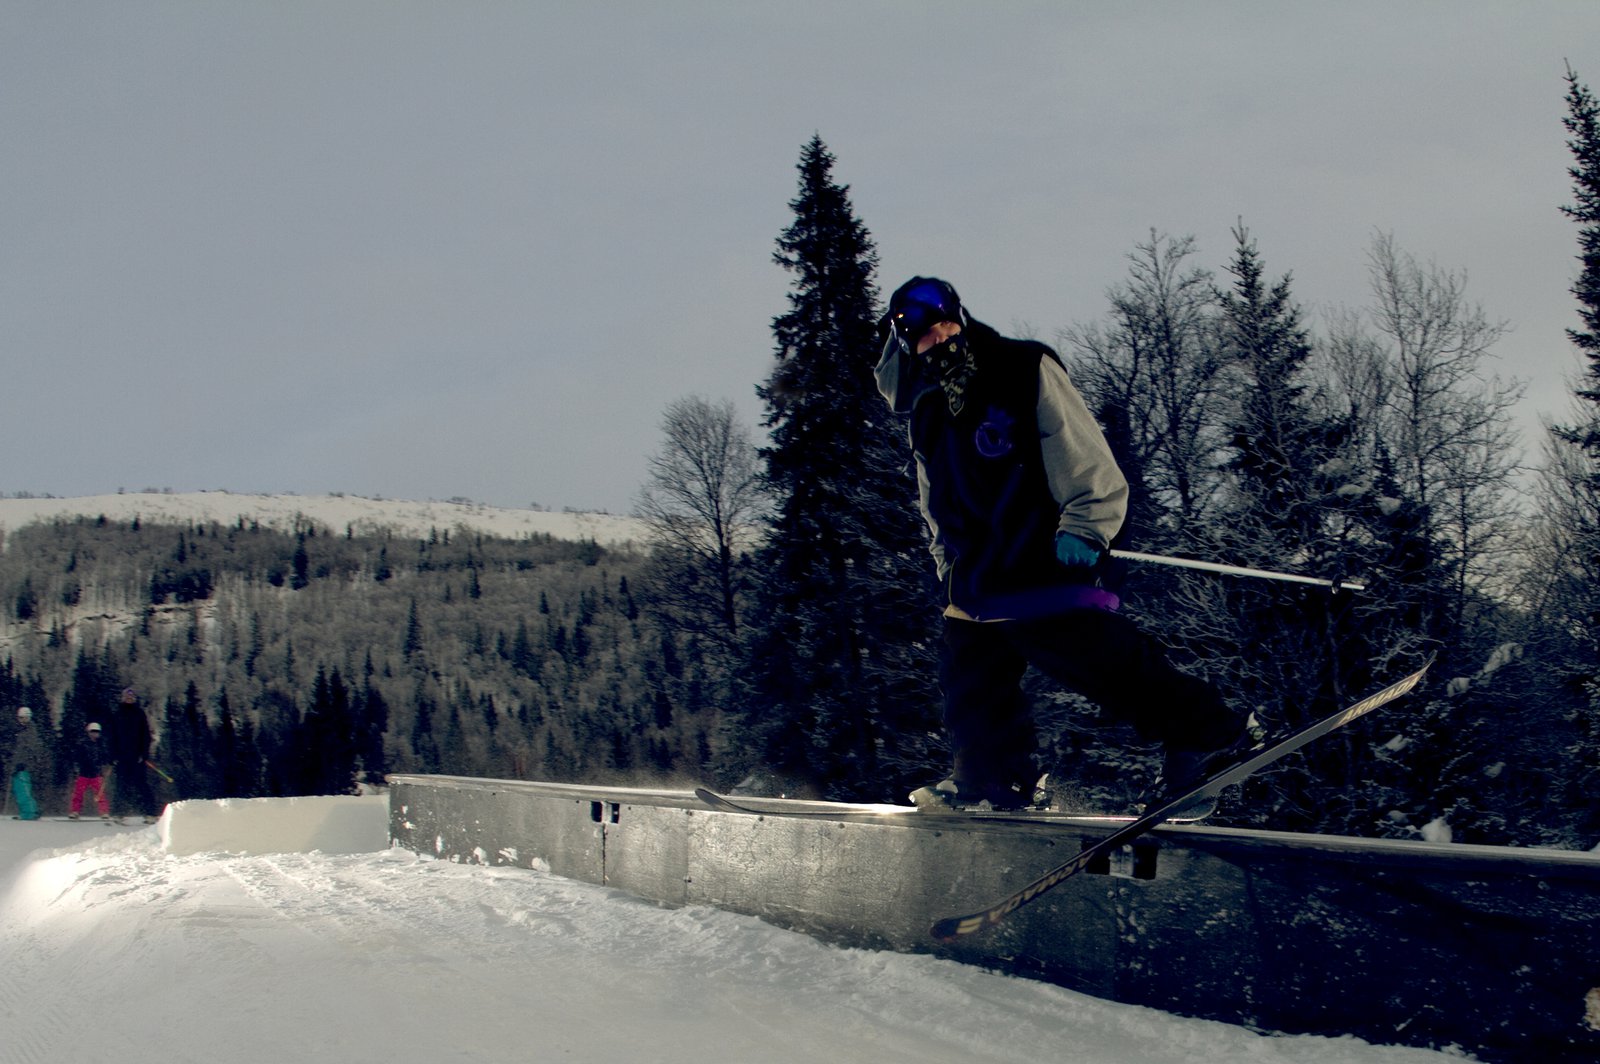 Rails at Are Sweden